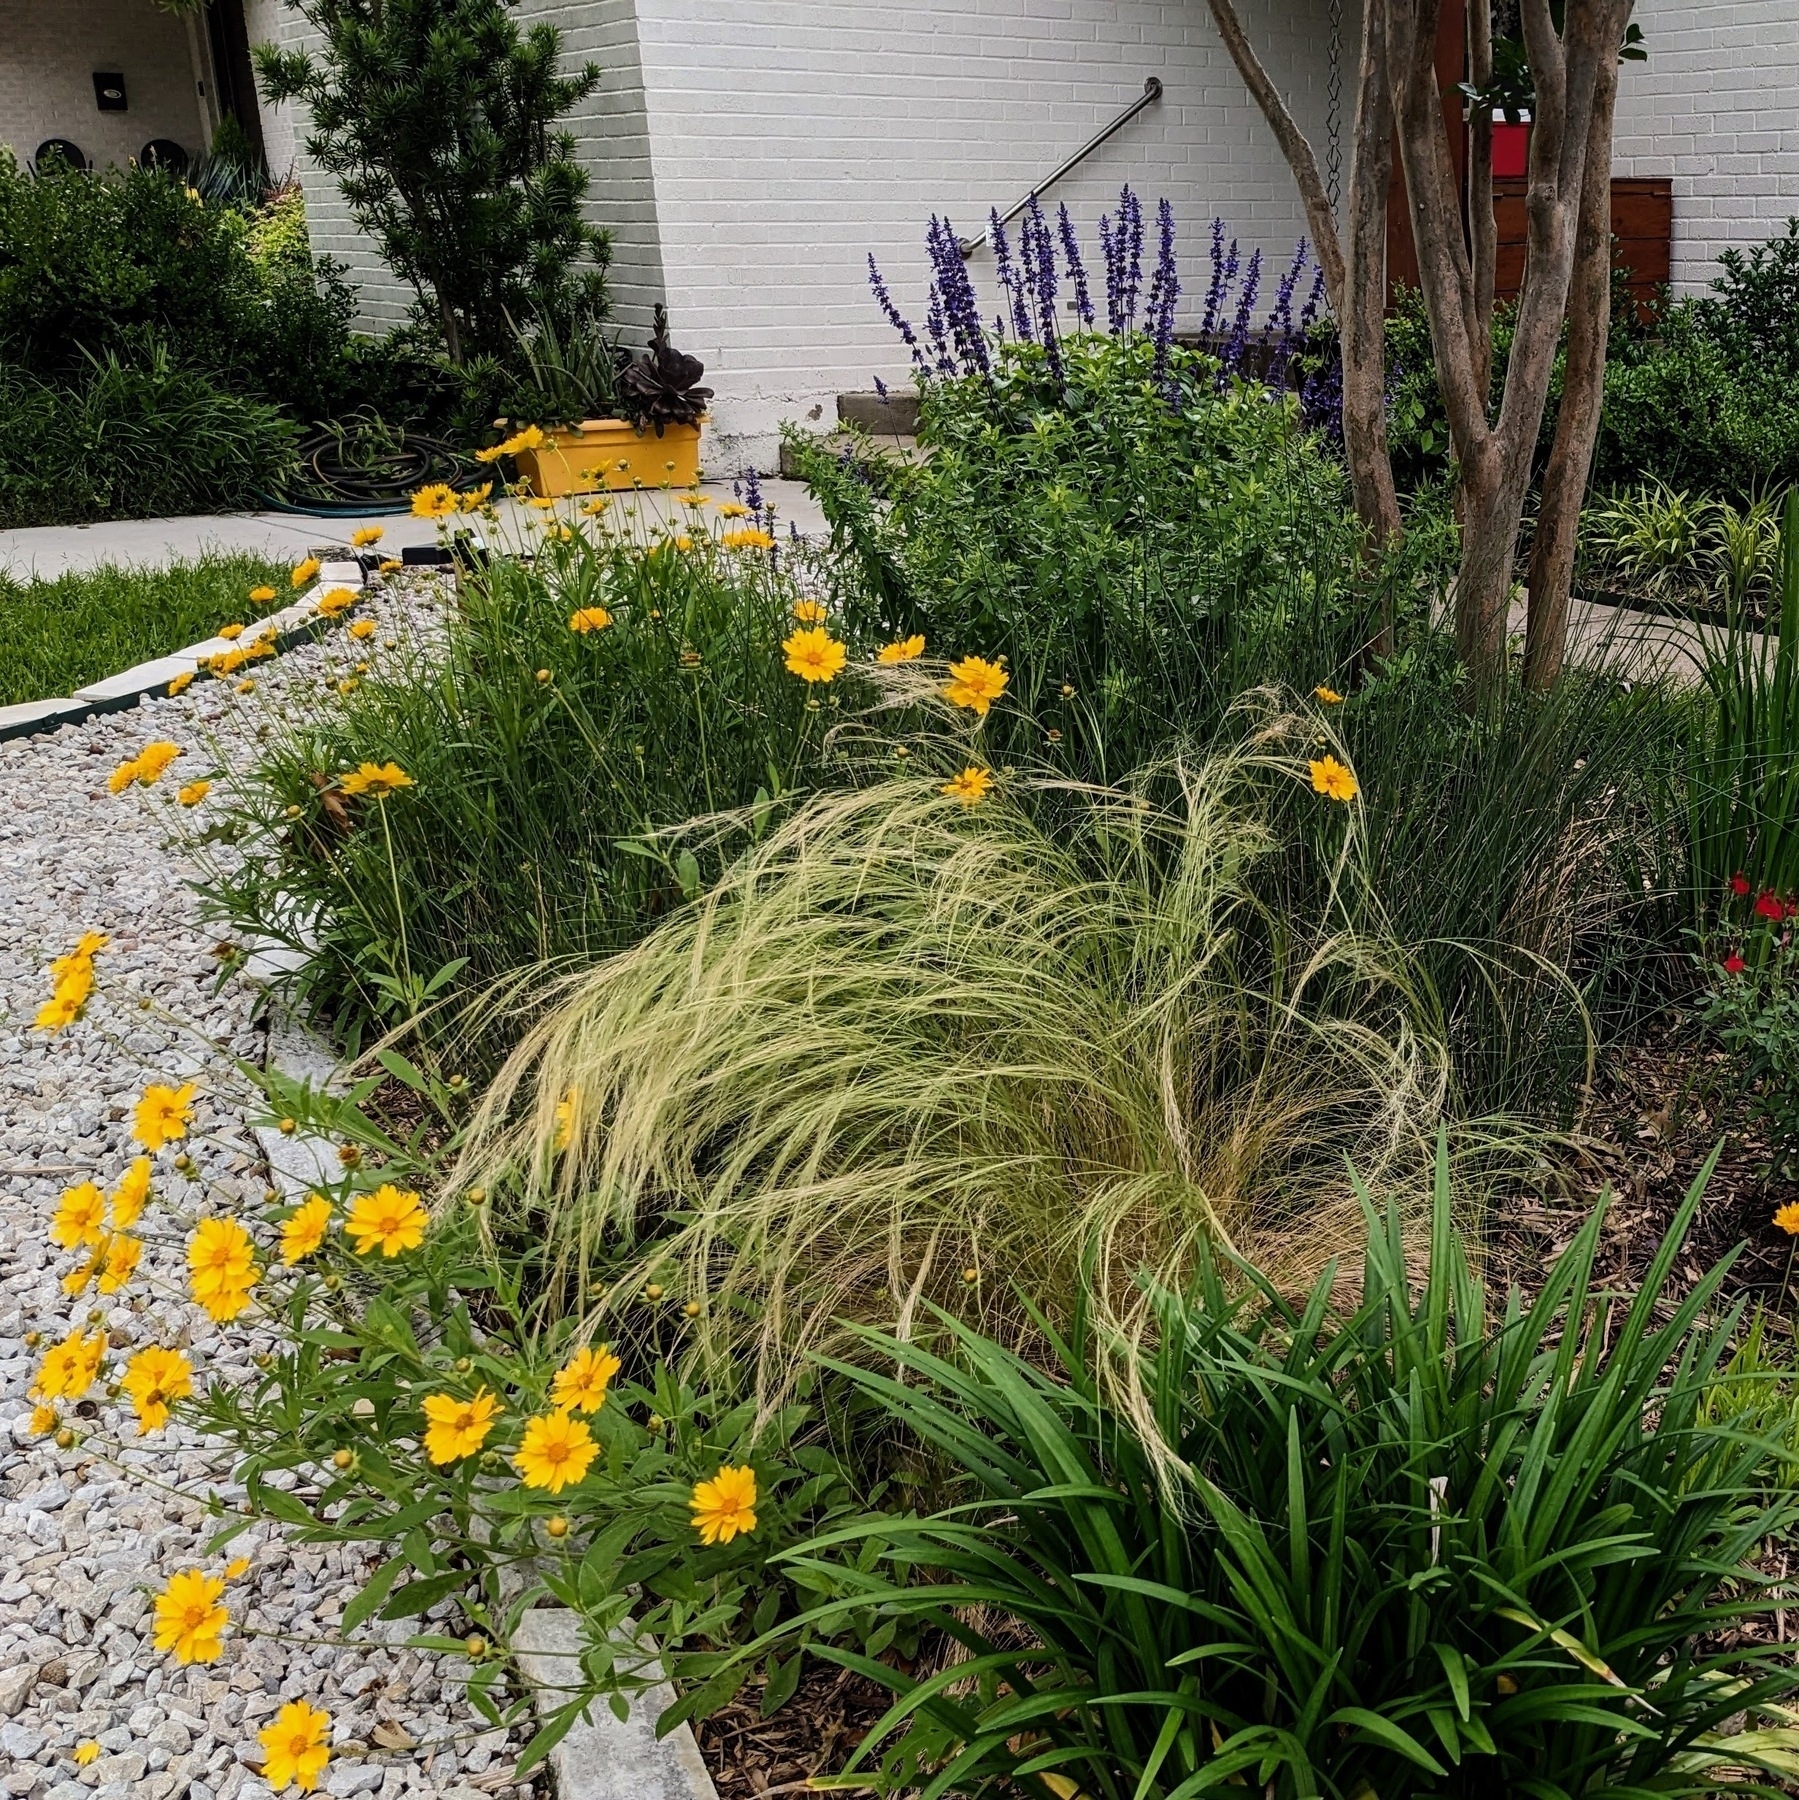 Photo of yellow coreopsis flowers in a flower bed with grasses and other flowers.